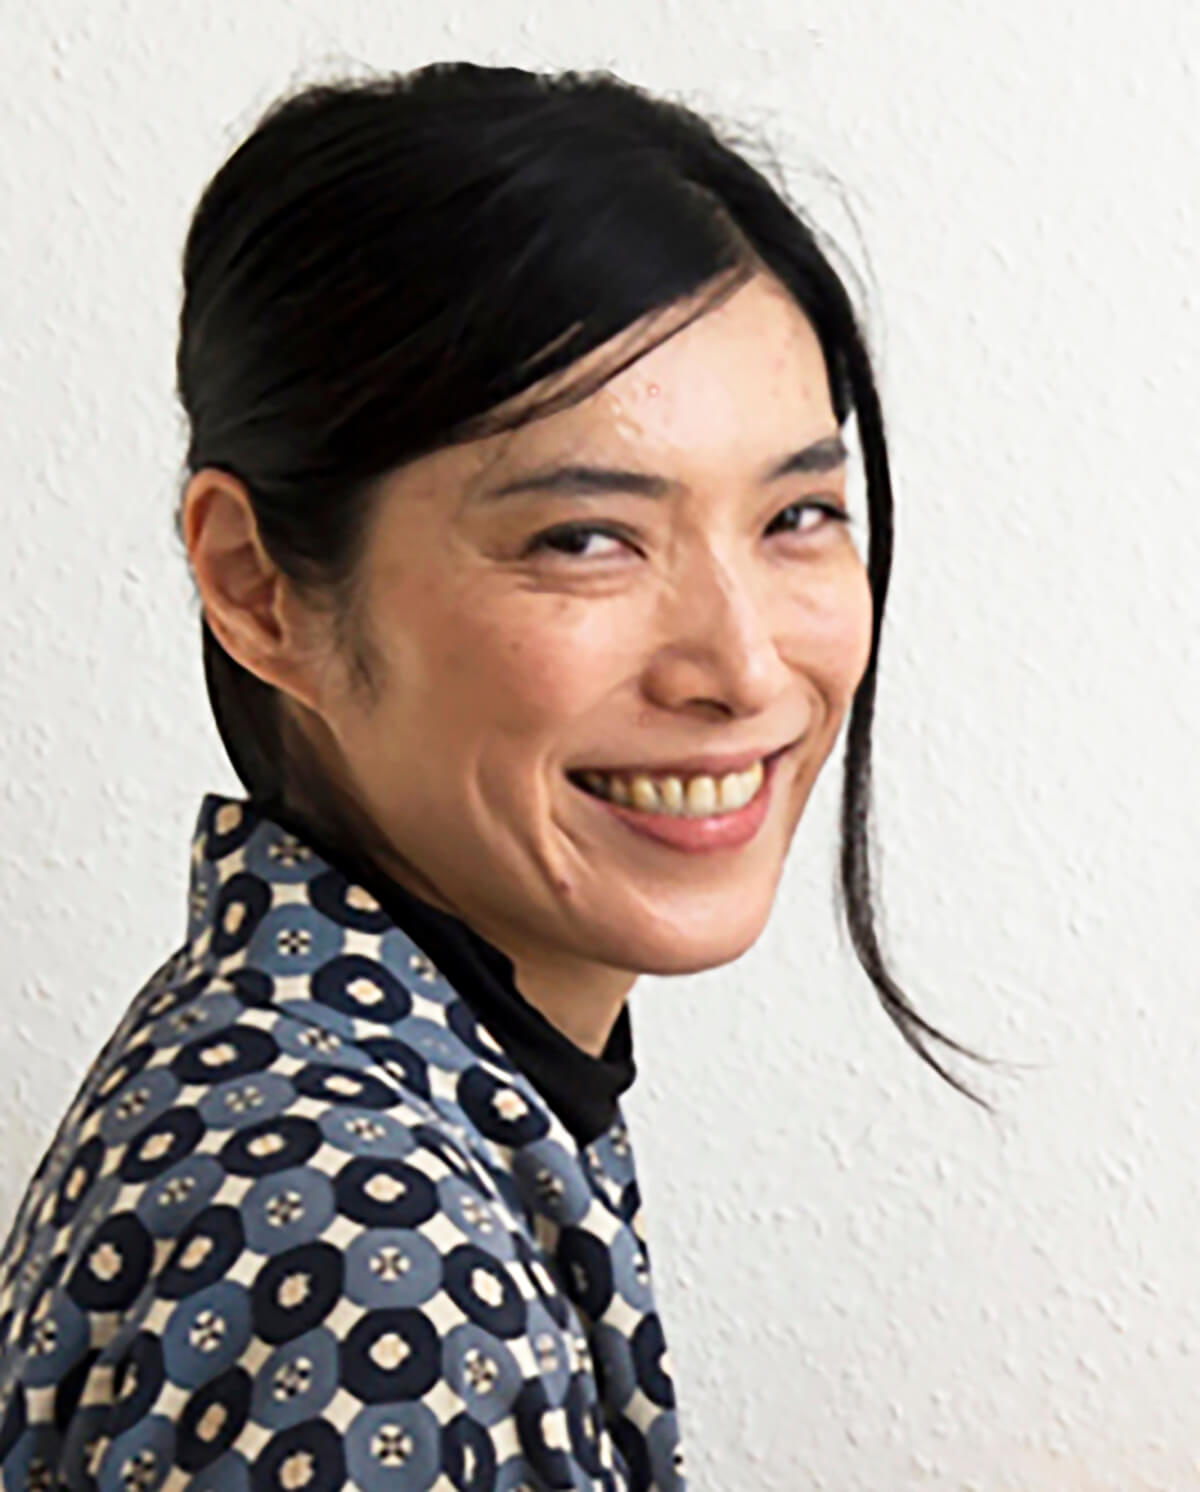 Rie Takeda, Neo-Japonism artist and Calligrapher